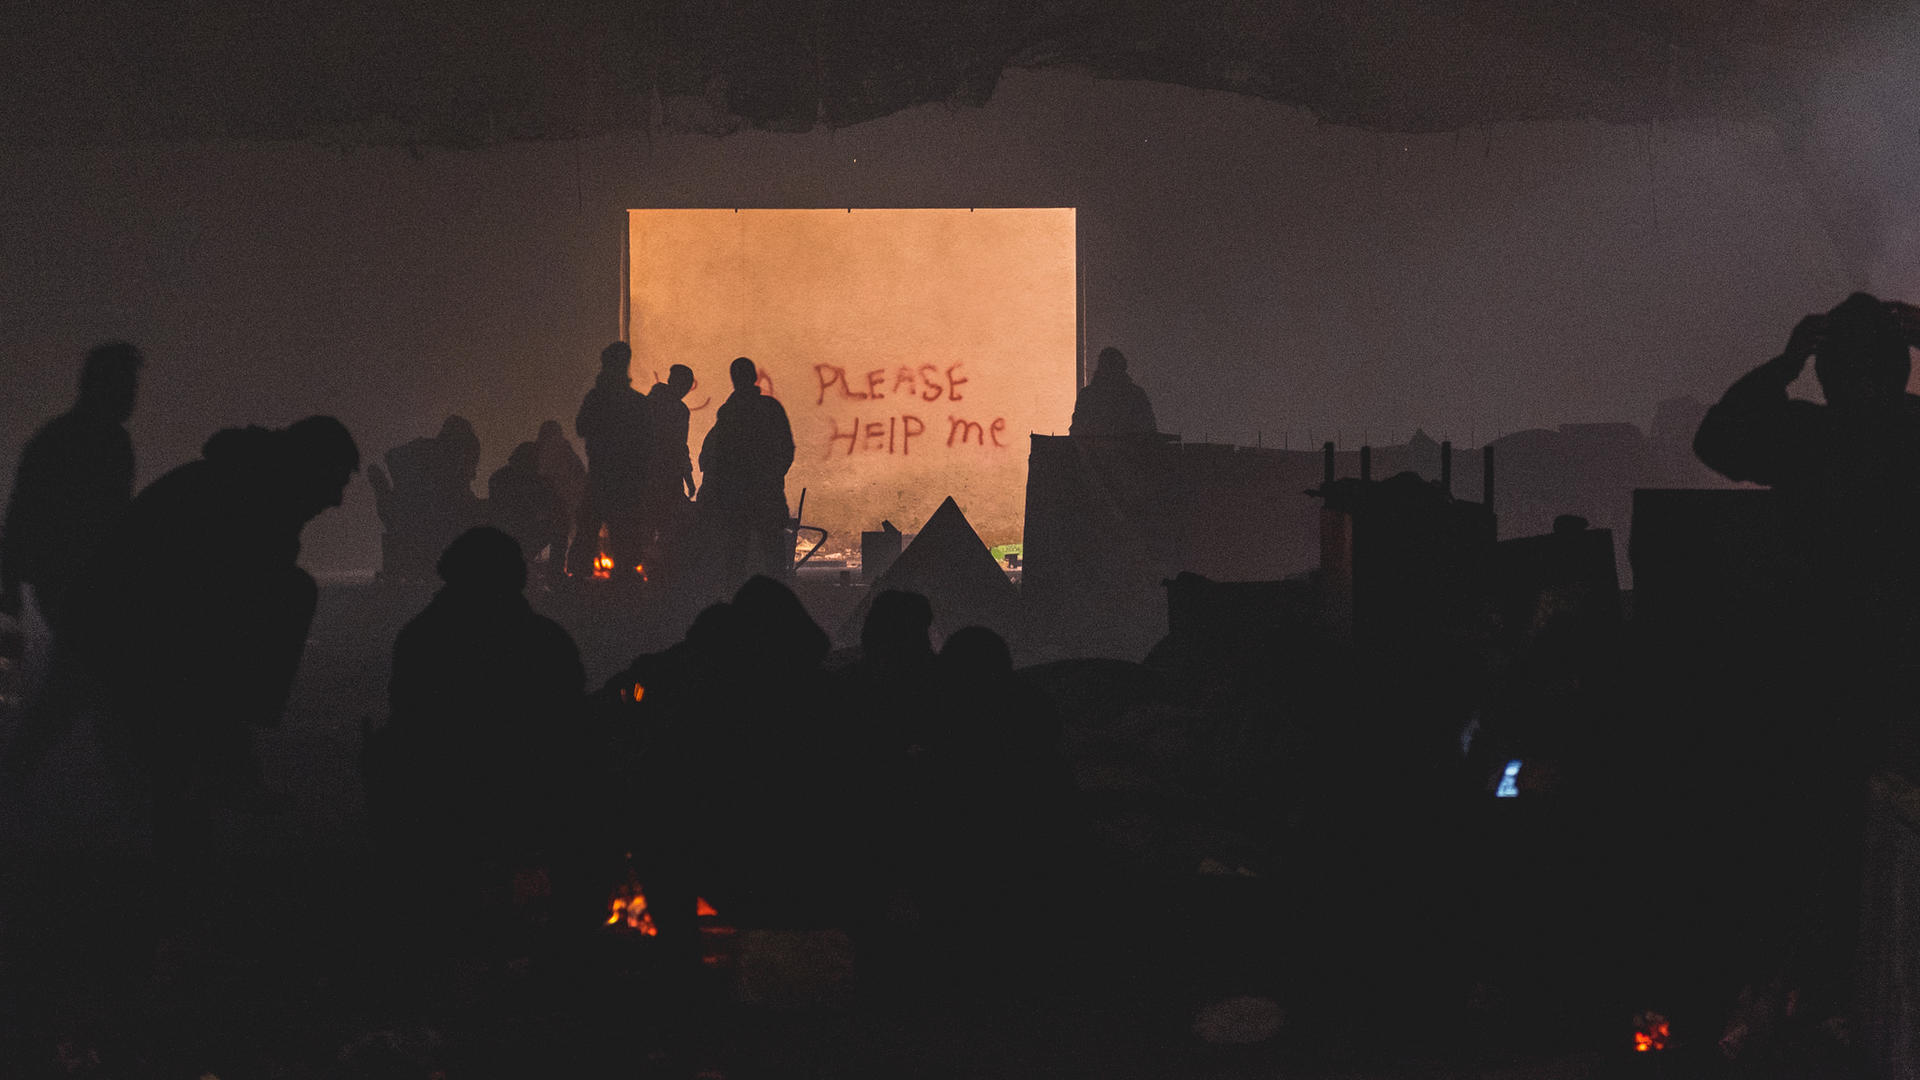 Young refugees, seen in silhouette, warm themselves by a bonfire on a derelict industrial strip in Belgrade near graffiti that reads "PLEASE HELP US."